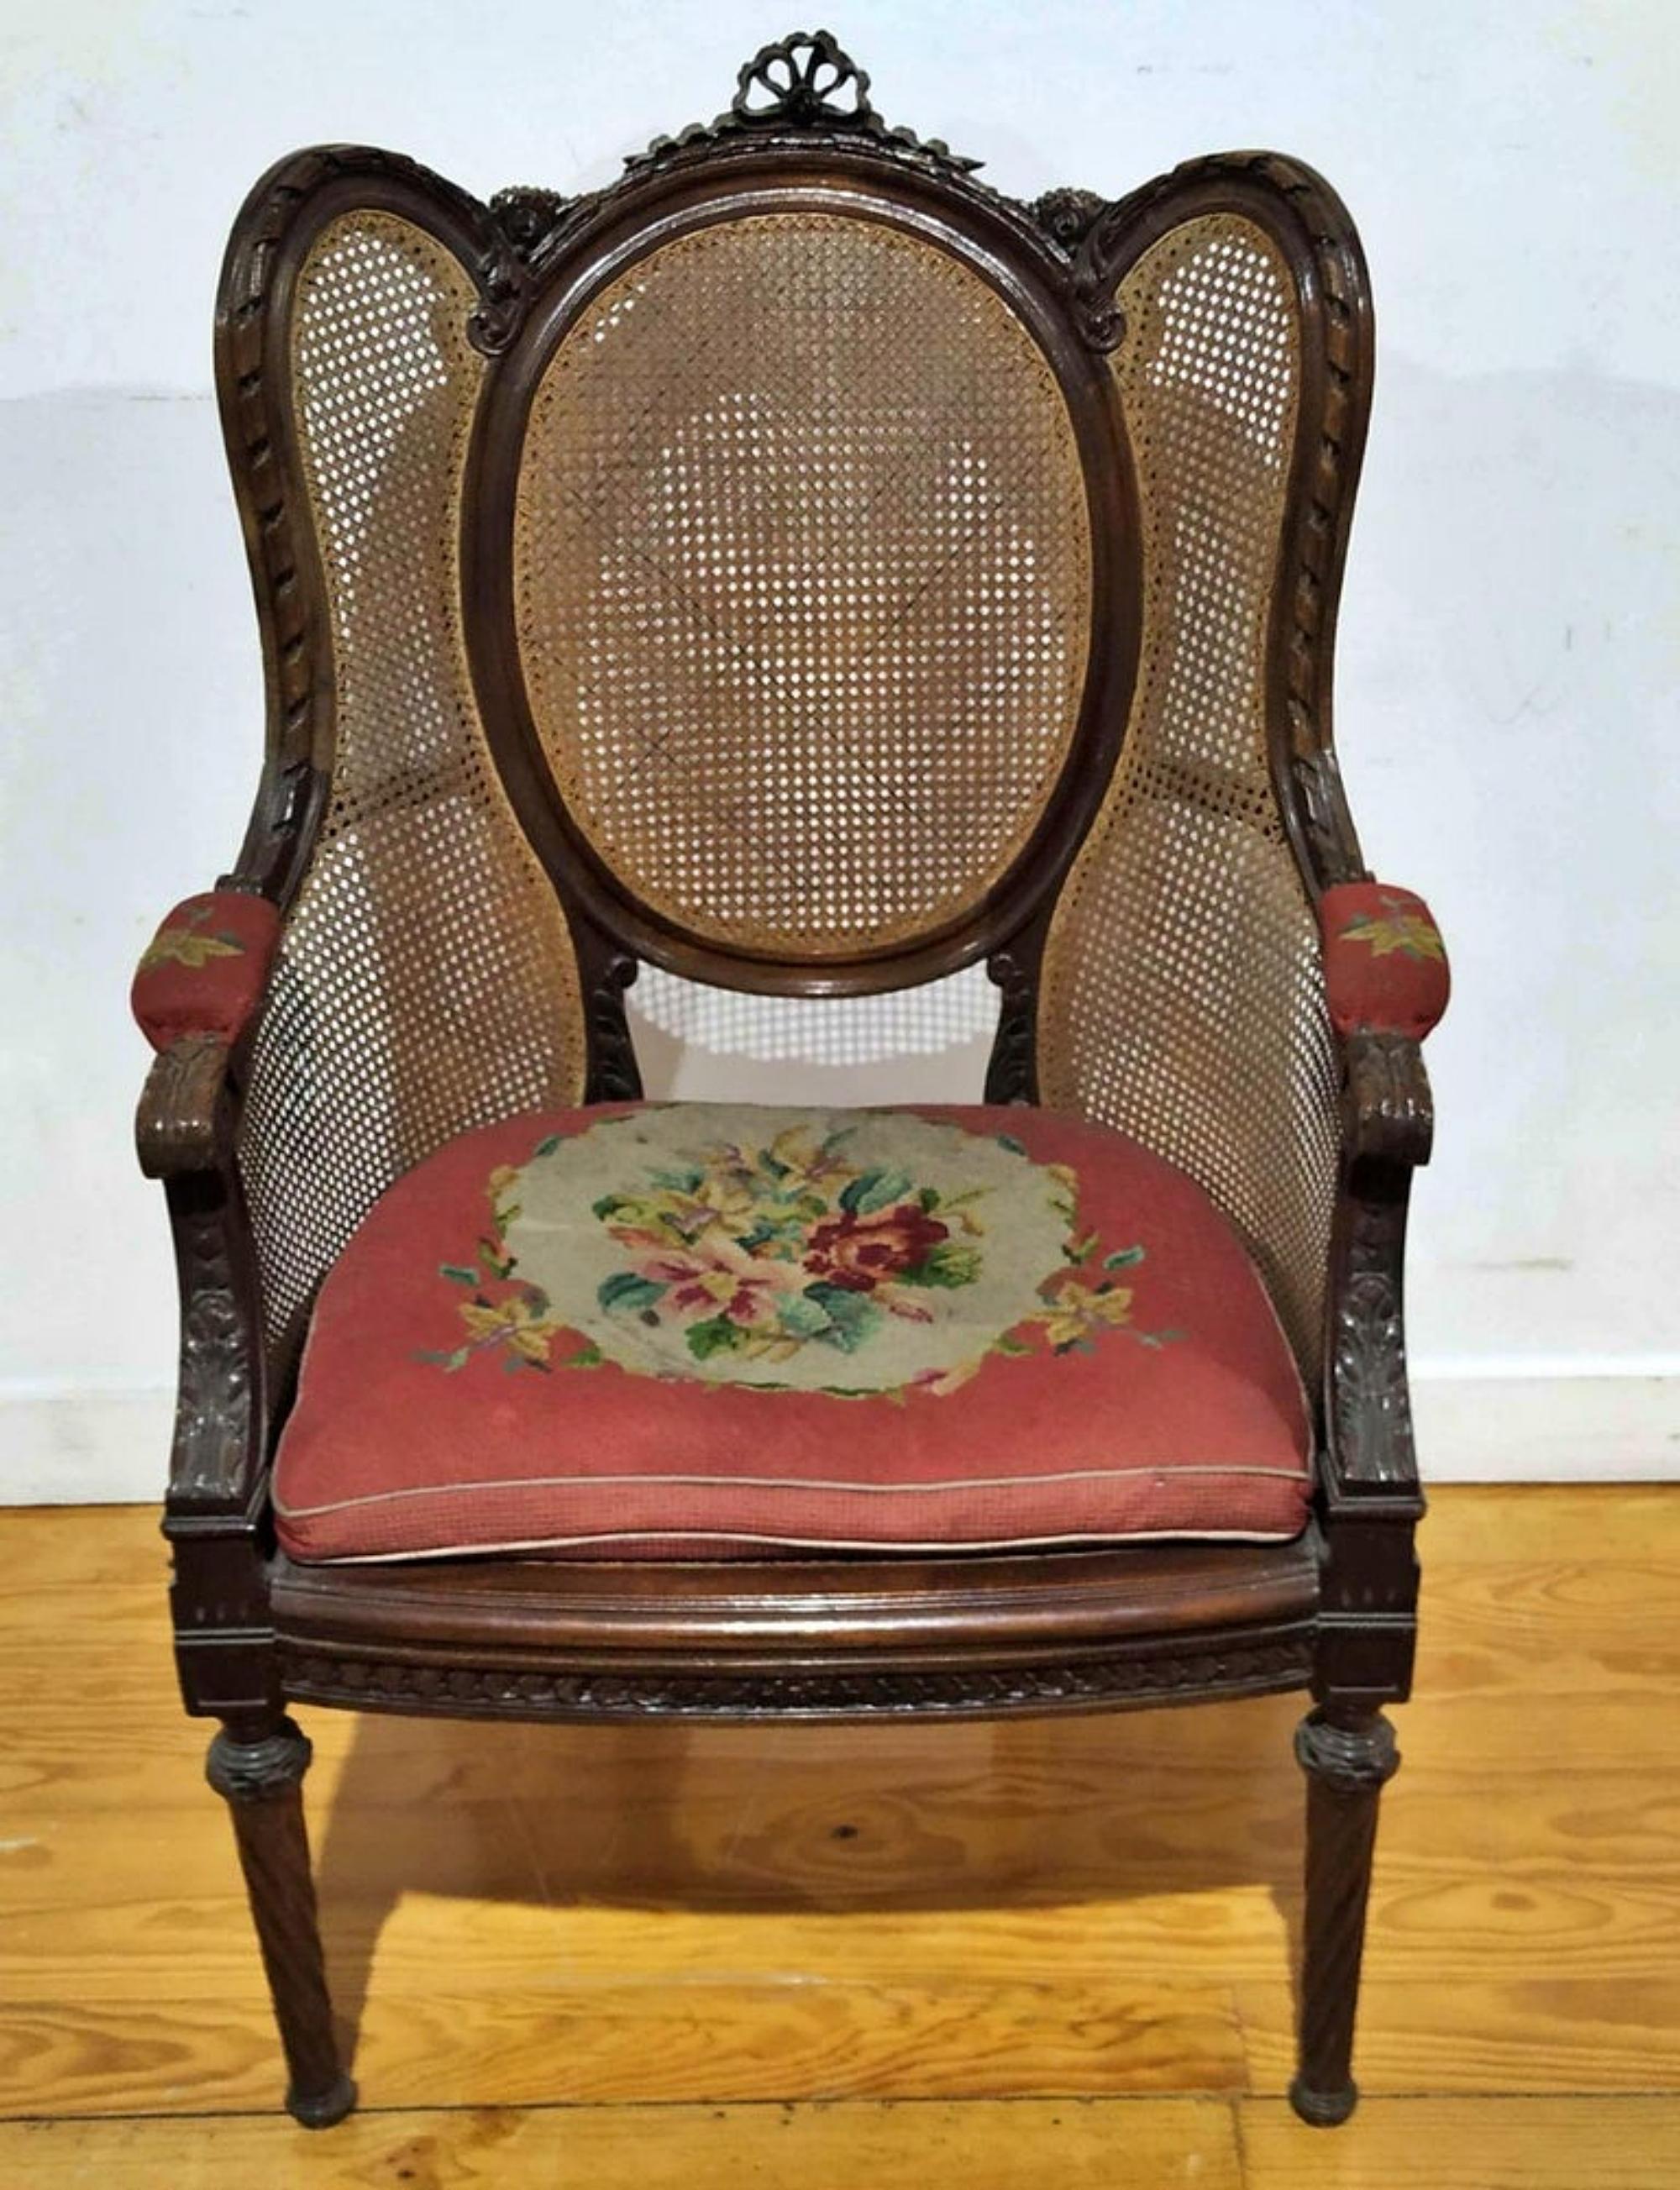 PORTUGUESE CHAIR LOUIS XV STYLE 19th Century

in mahogany wood seats, armrests and back in straw.
Small defects.
Dim.: 113 x 66 x 60 cm.
good conditions